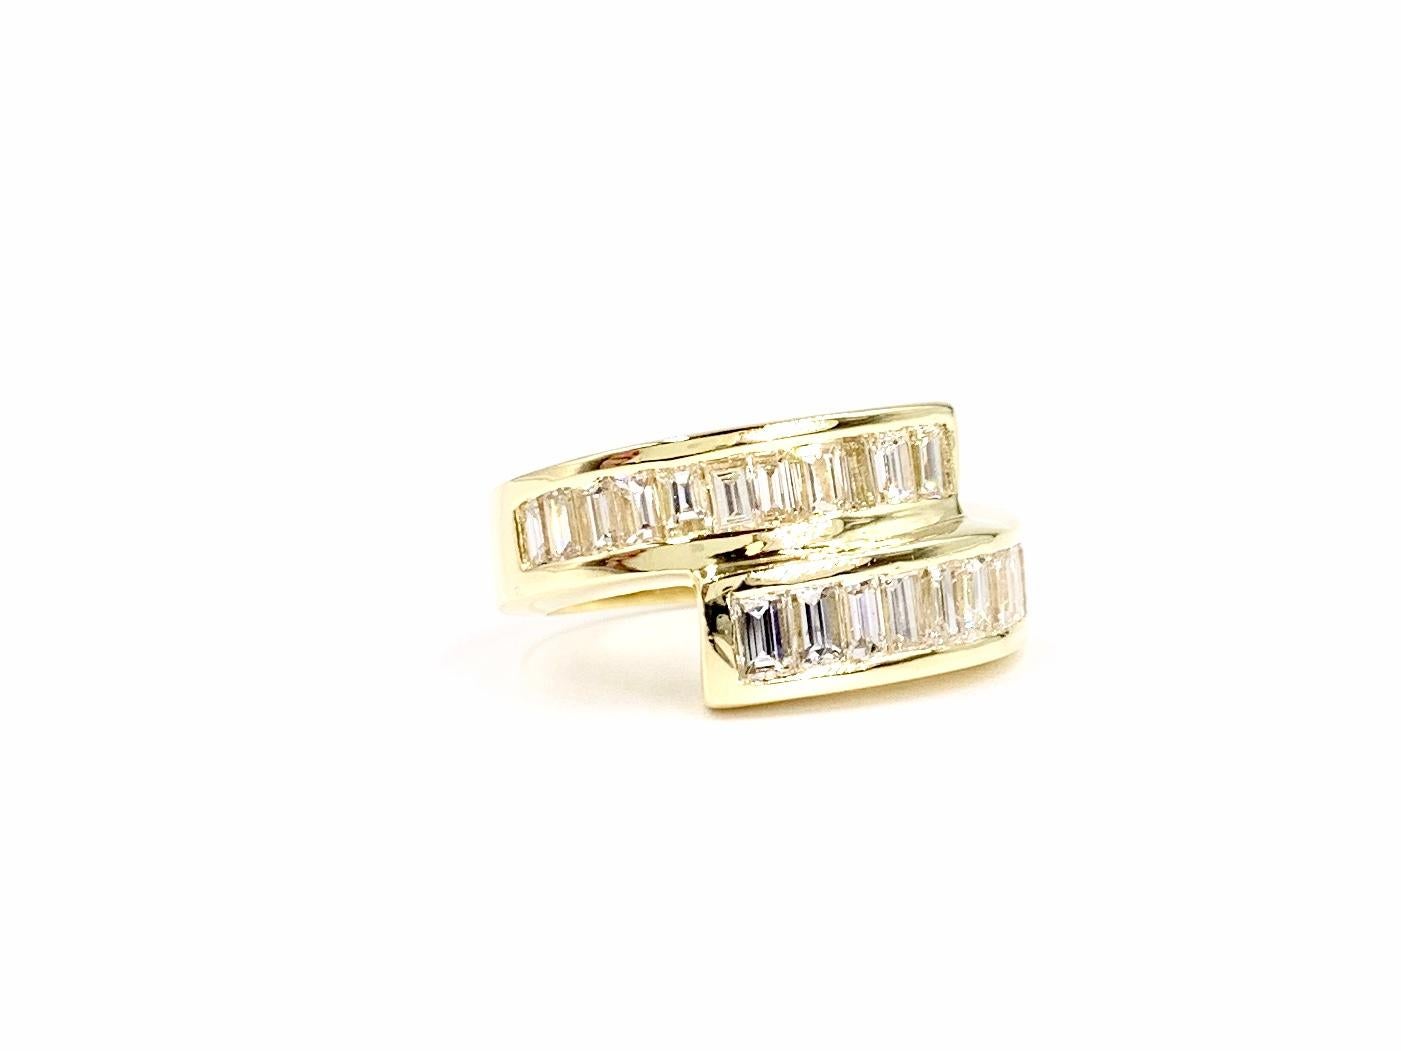 A sleek and wearable polished 18 karat yellow gold wrap around bypass style ring featuring 21 beautifully channel set baguette diamonds at approximately 3.50 carats total weight. Diamond quality is approximately H color, VS2 clarity. Width of ring